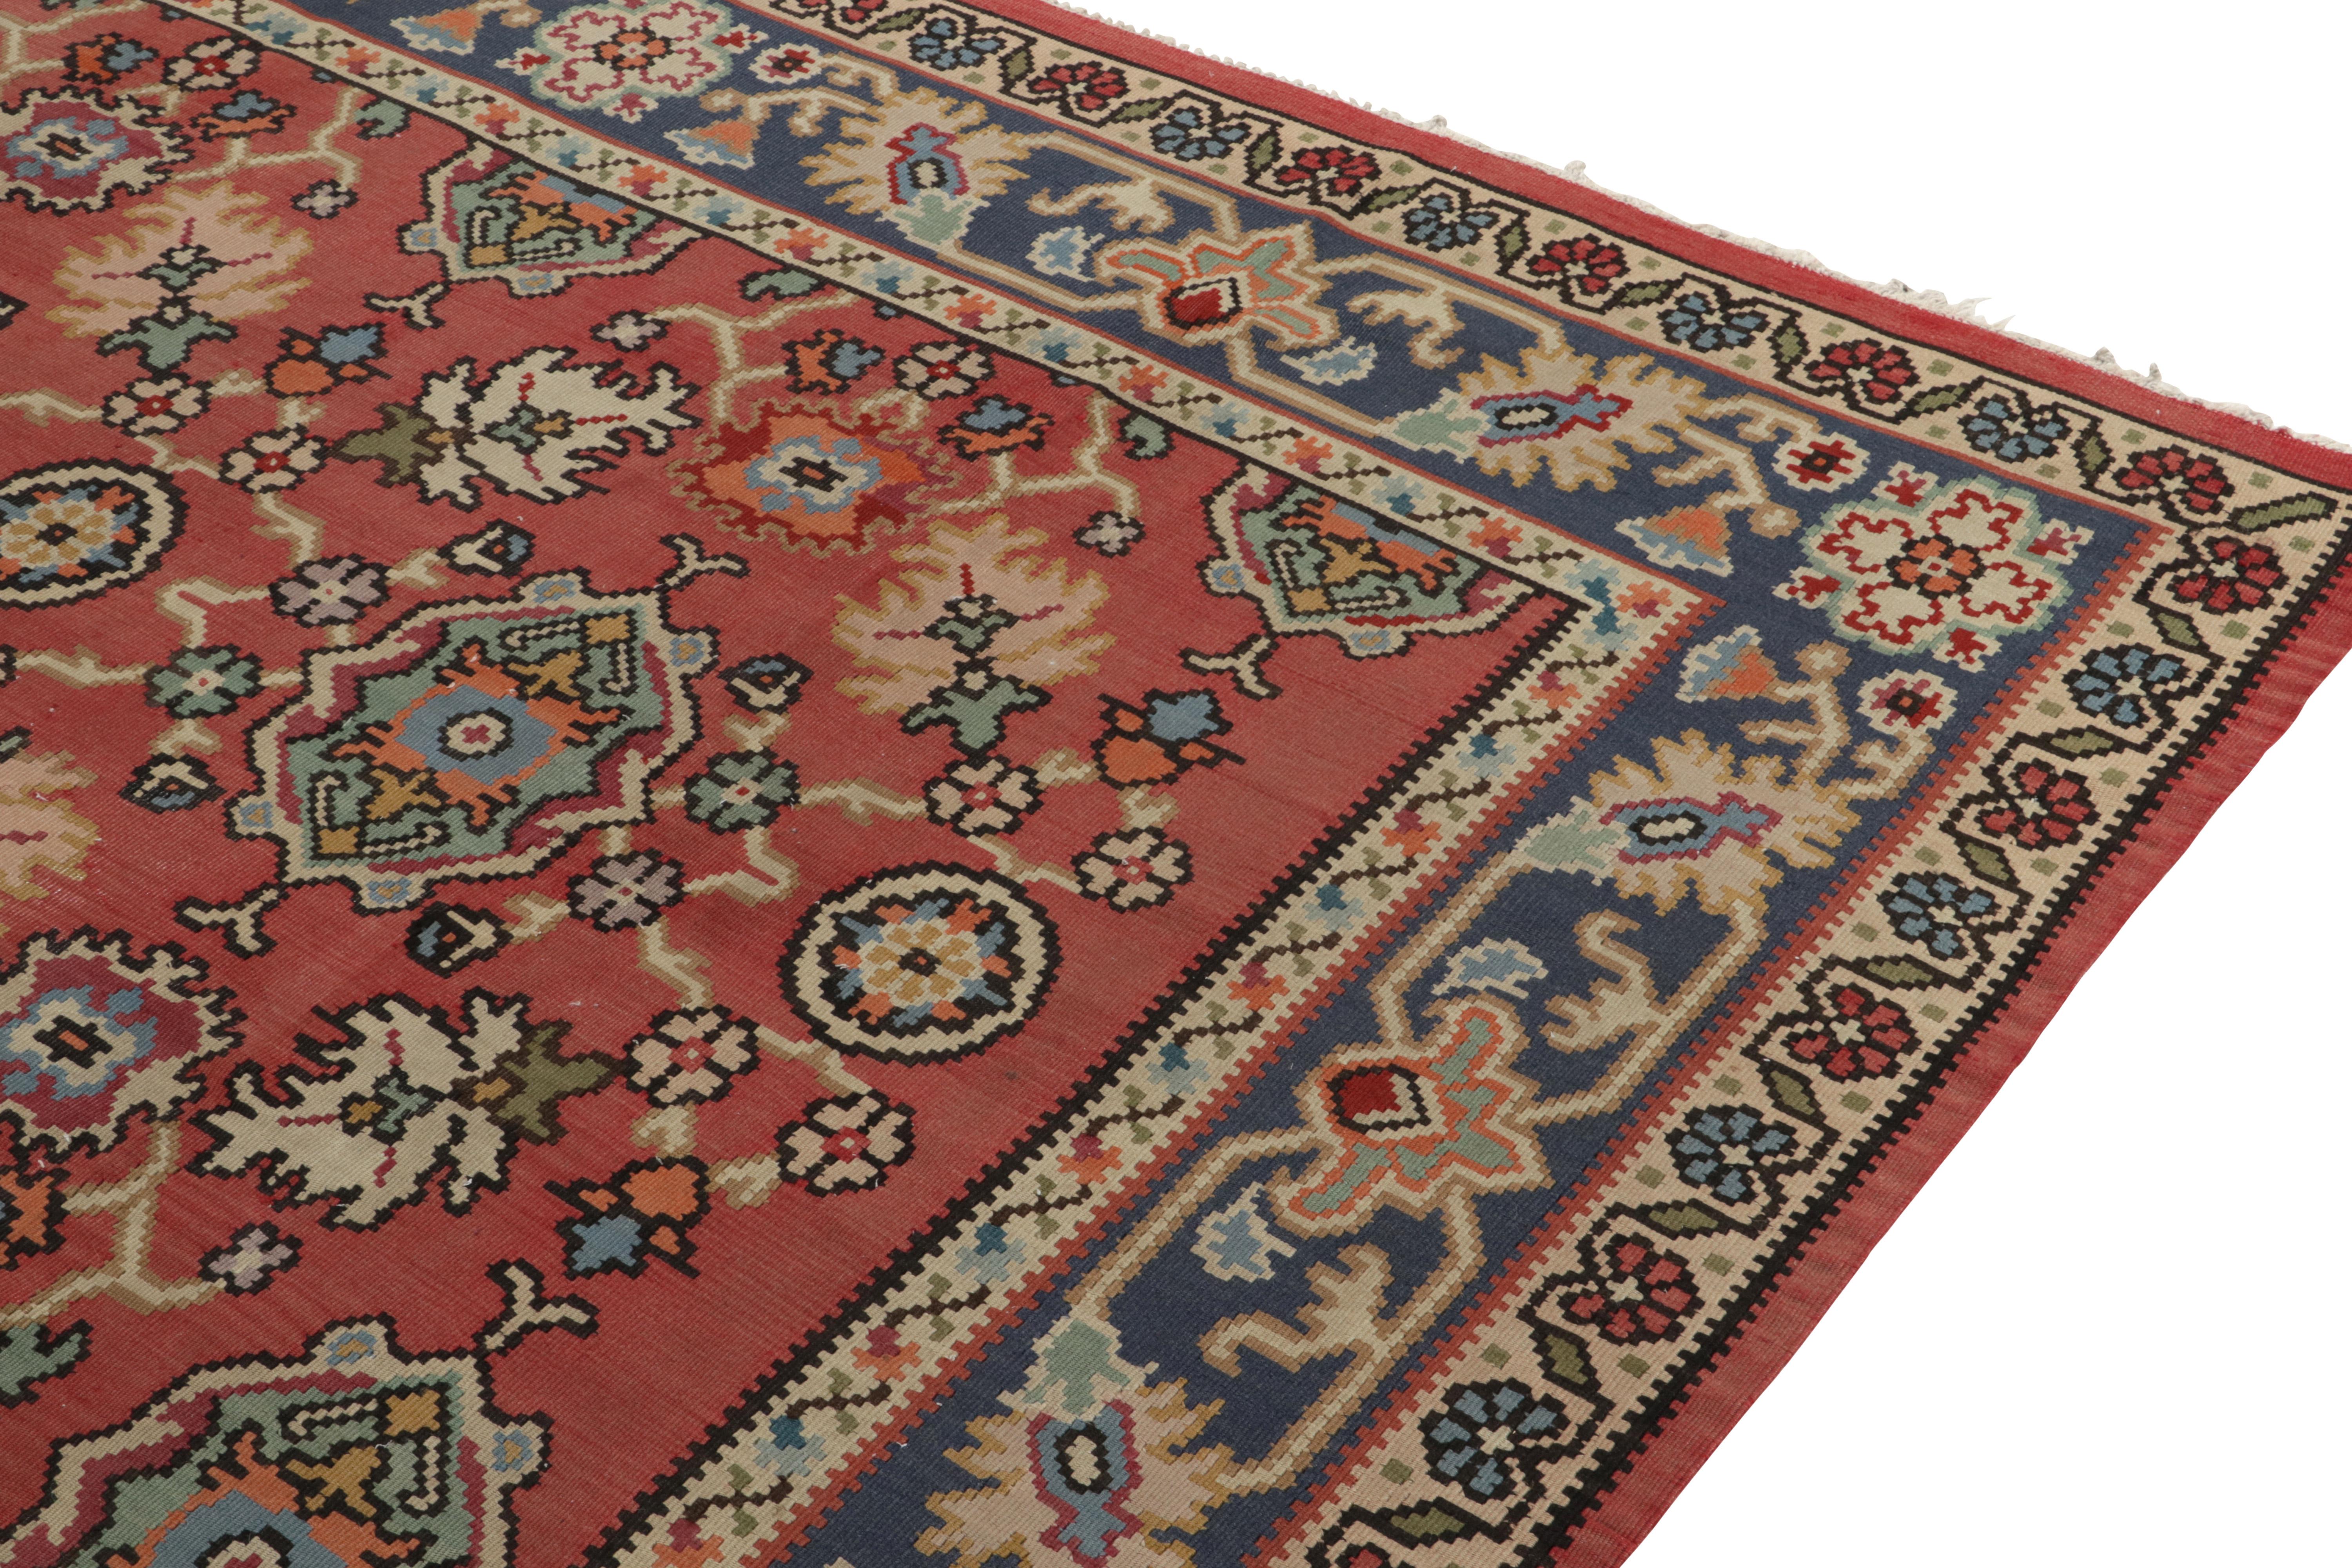 Hand-Knotted Vintage Bessarabian Kilim in Red with Teal Floral Patterns by Rug & Kilim For Sale